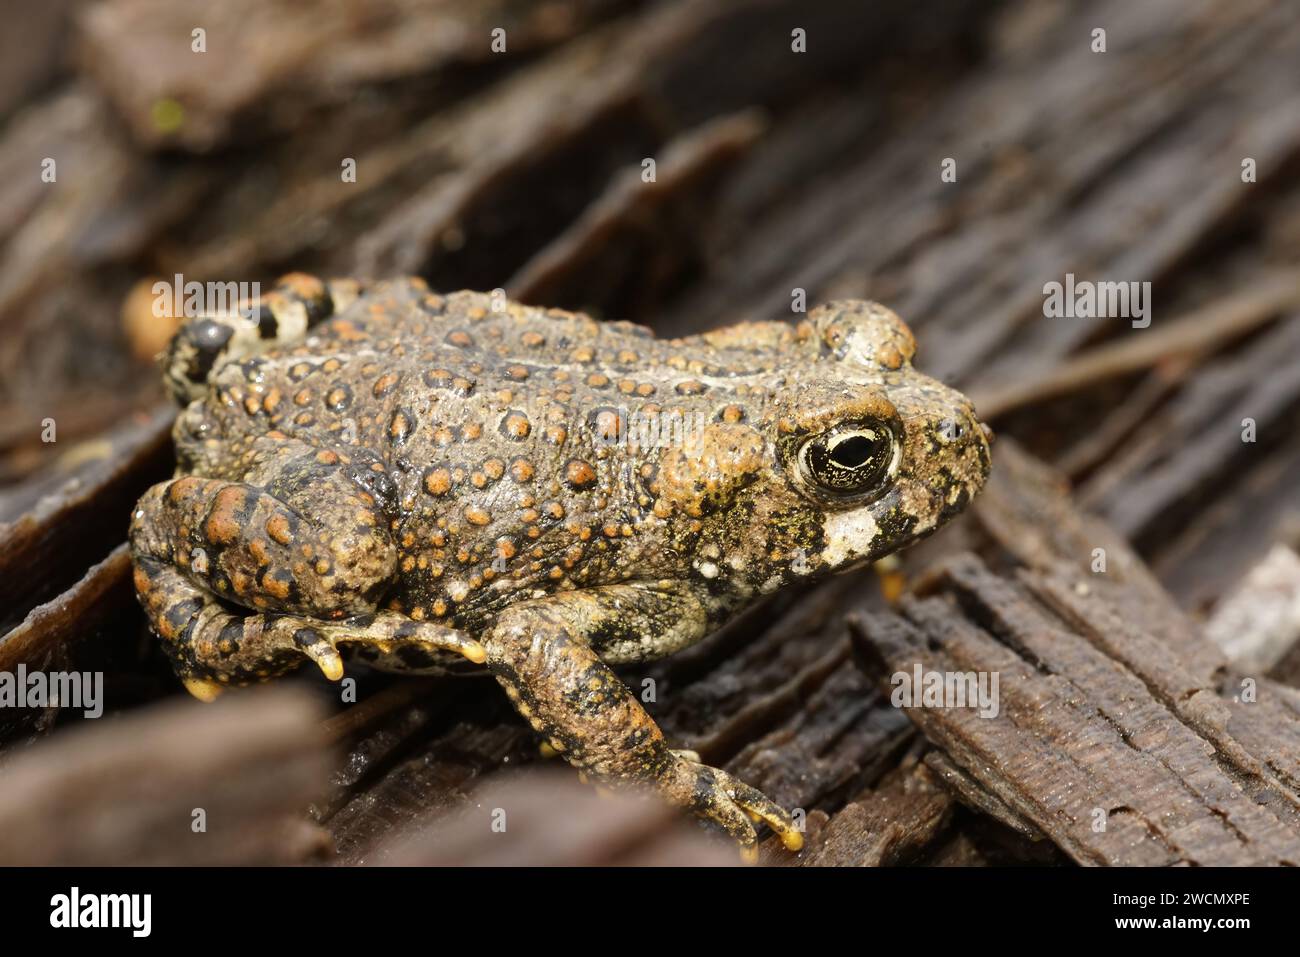 Natural close up on a juvenile Western toad, Anaxyrus boreas, sitting on the forest floor Stock Photo